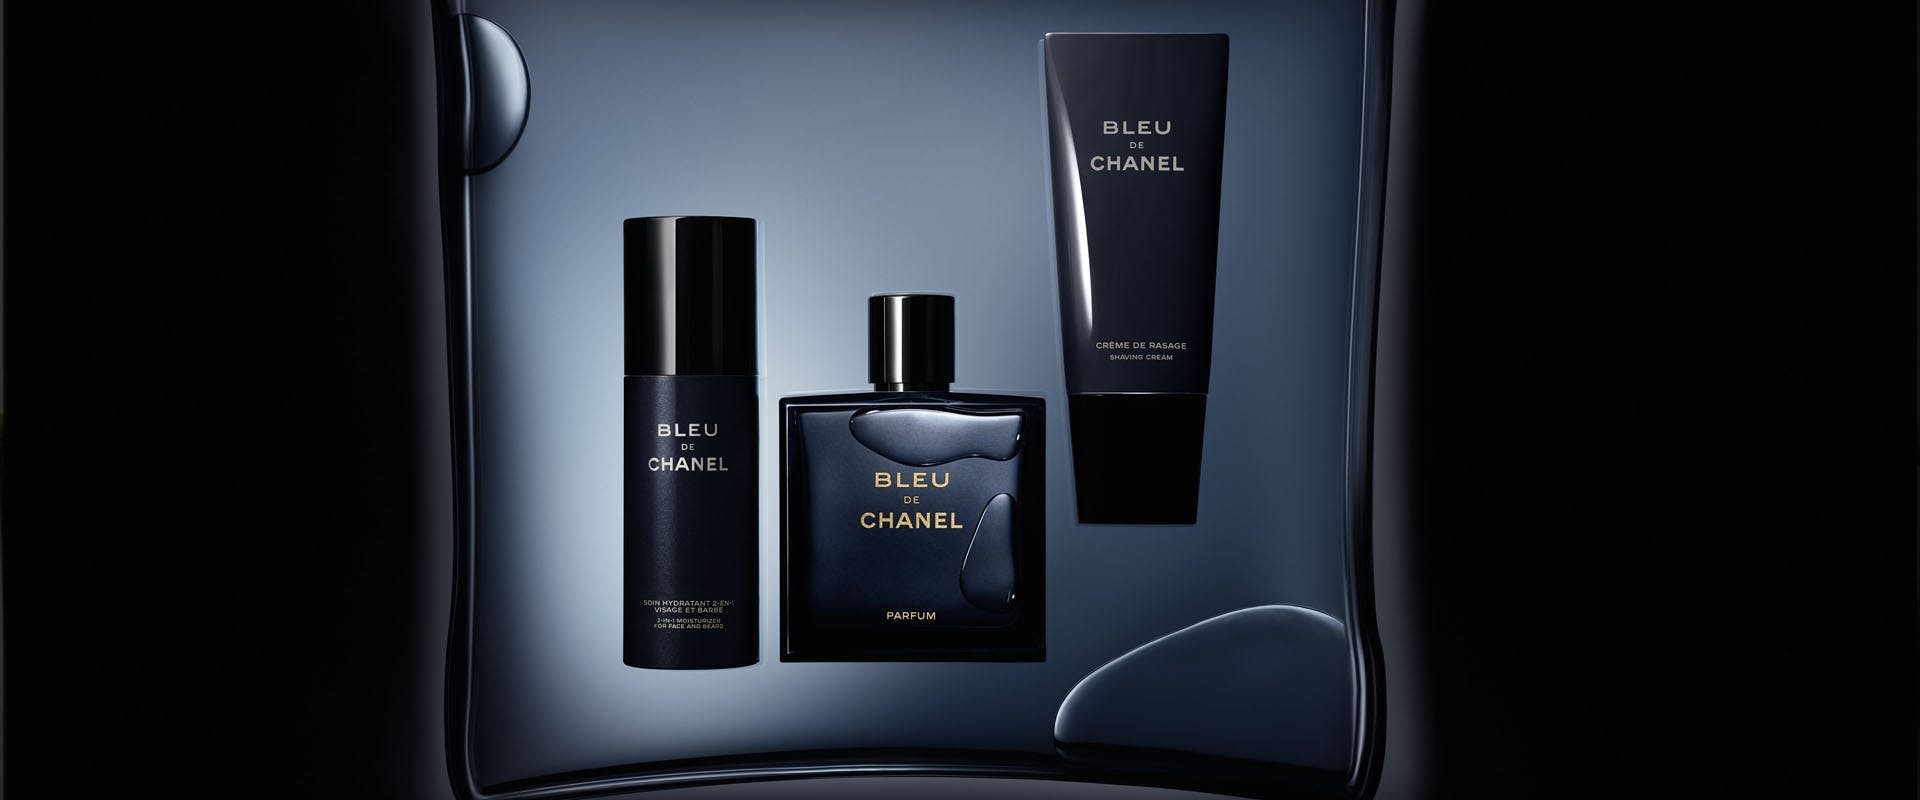 bottle aftershave cosmetics